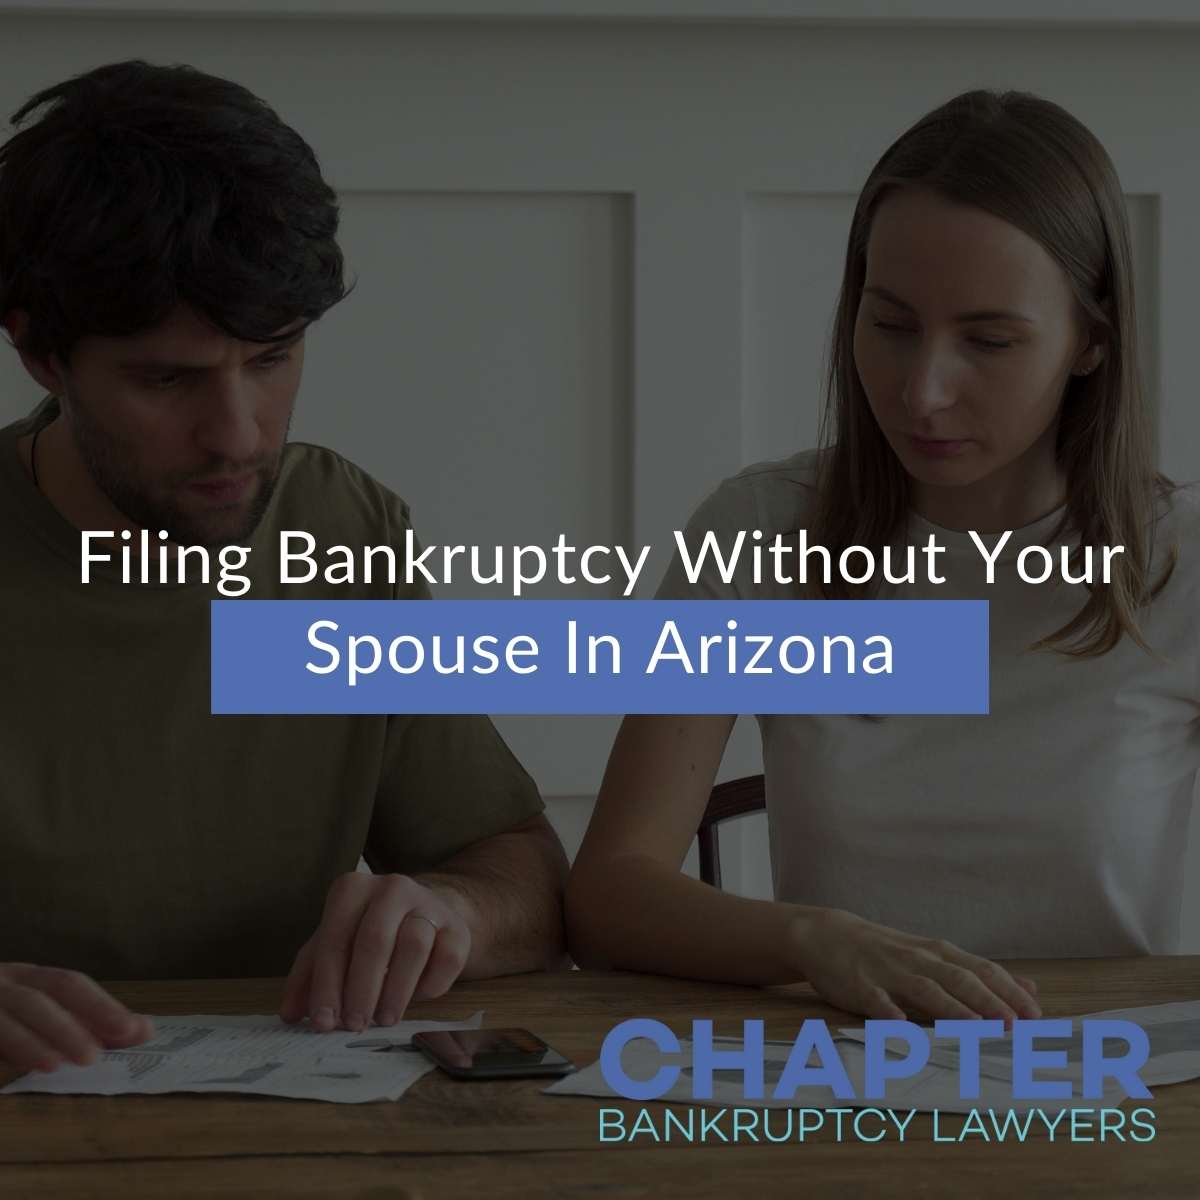 Filing Bankruptcy Without Your Spouse In Arizona